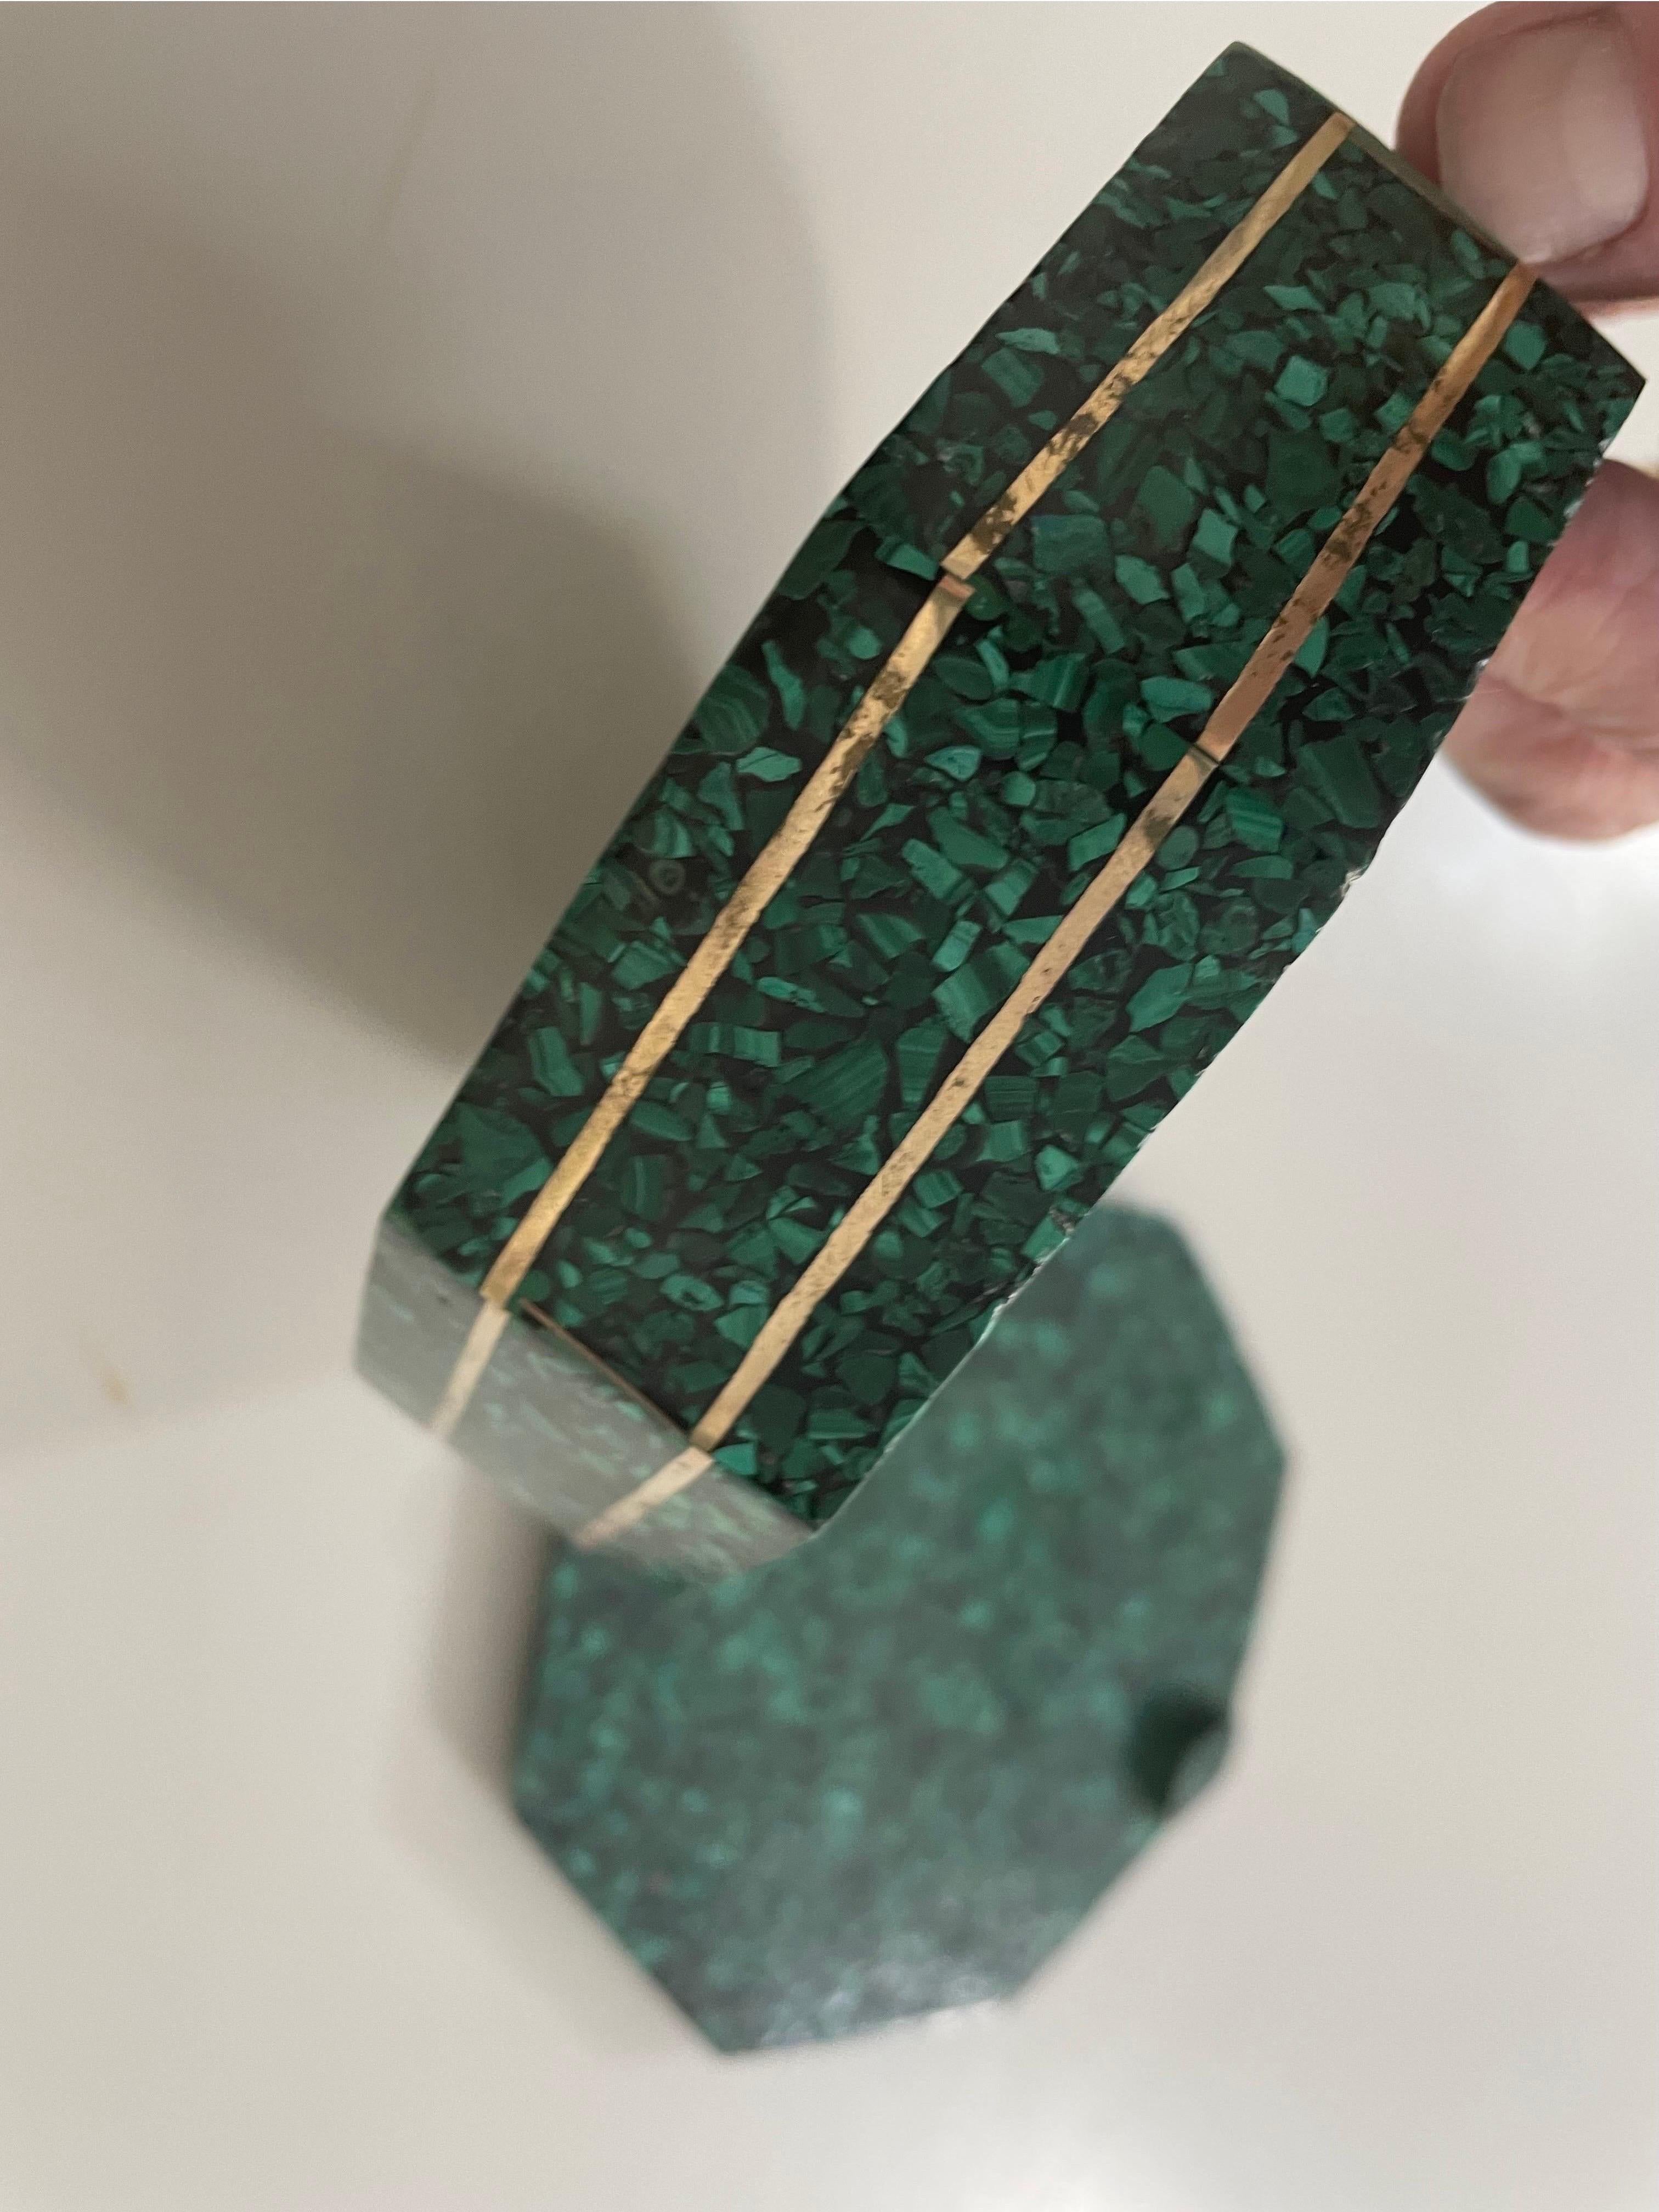 This is a vintage malachite and brass inlay octagonal box in good condition, no chips or cracks.